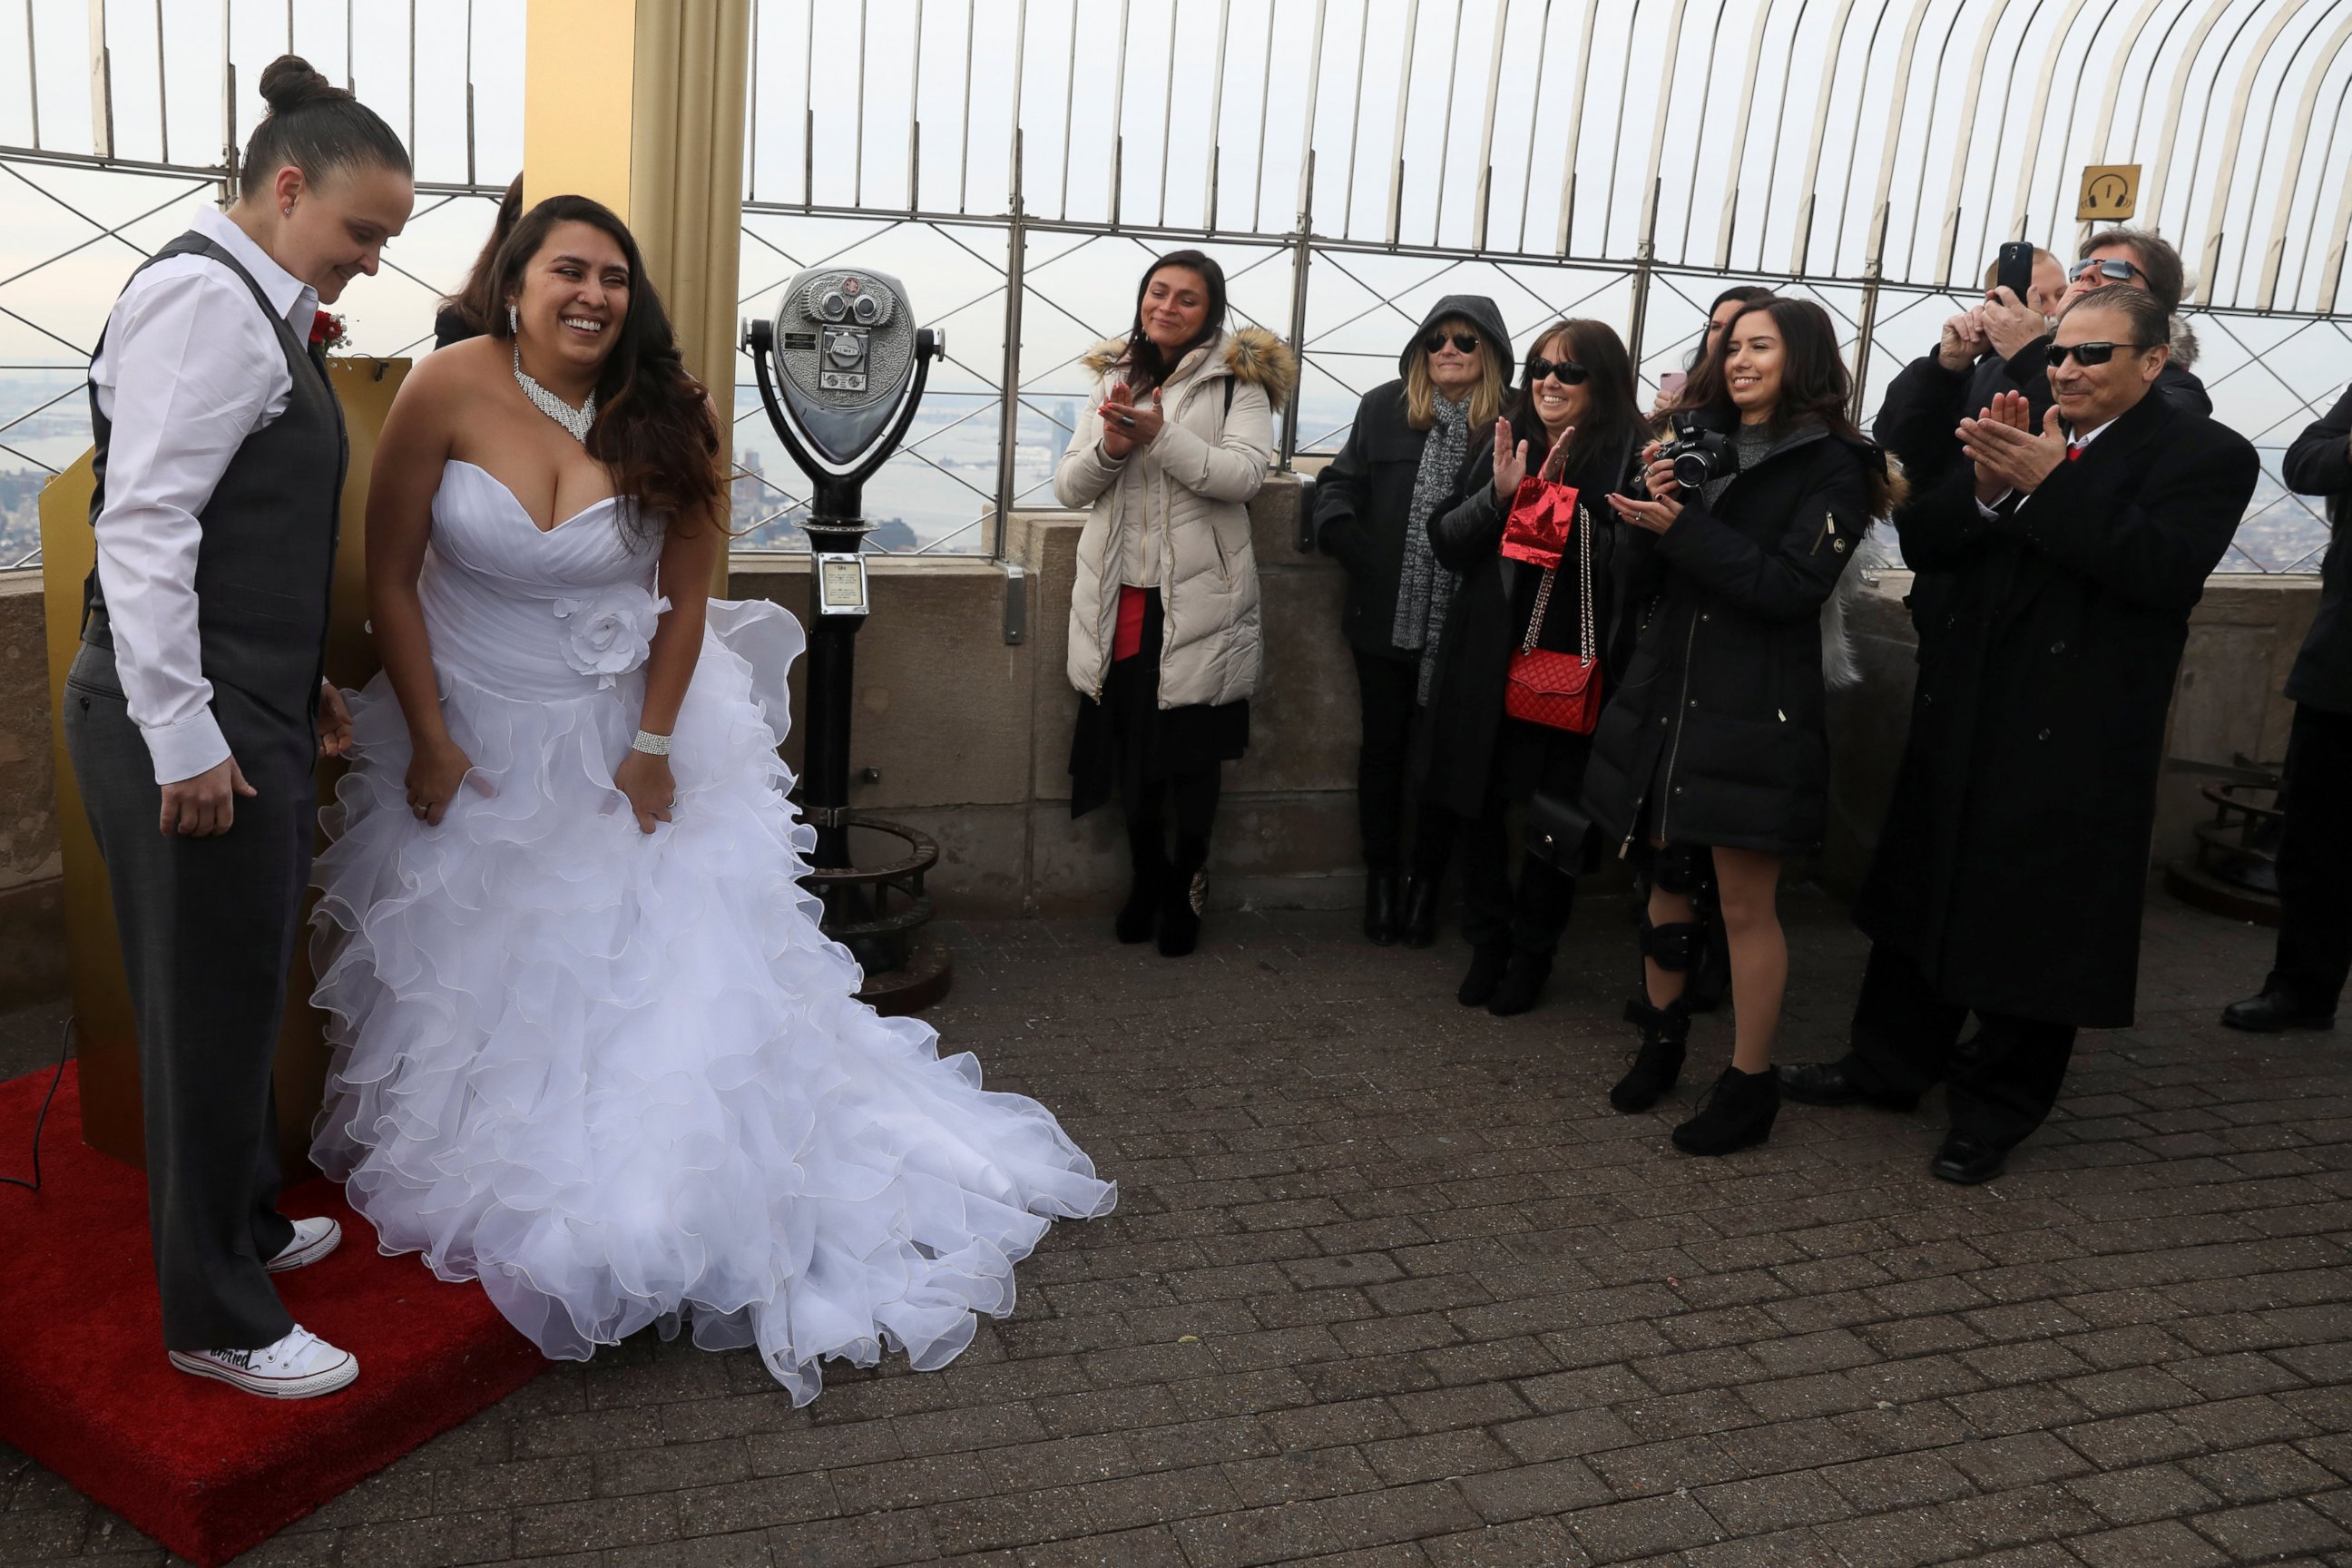 PHOTO: Krista Owens and Danielle Reno smile after exchanging their vows at their Valentine's Day wedding ceremony on top of the Empire State Building in New York, Feb. 14, 2017.